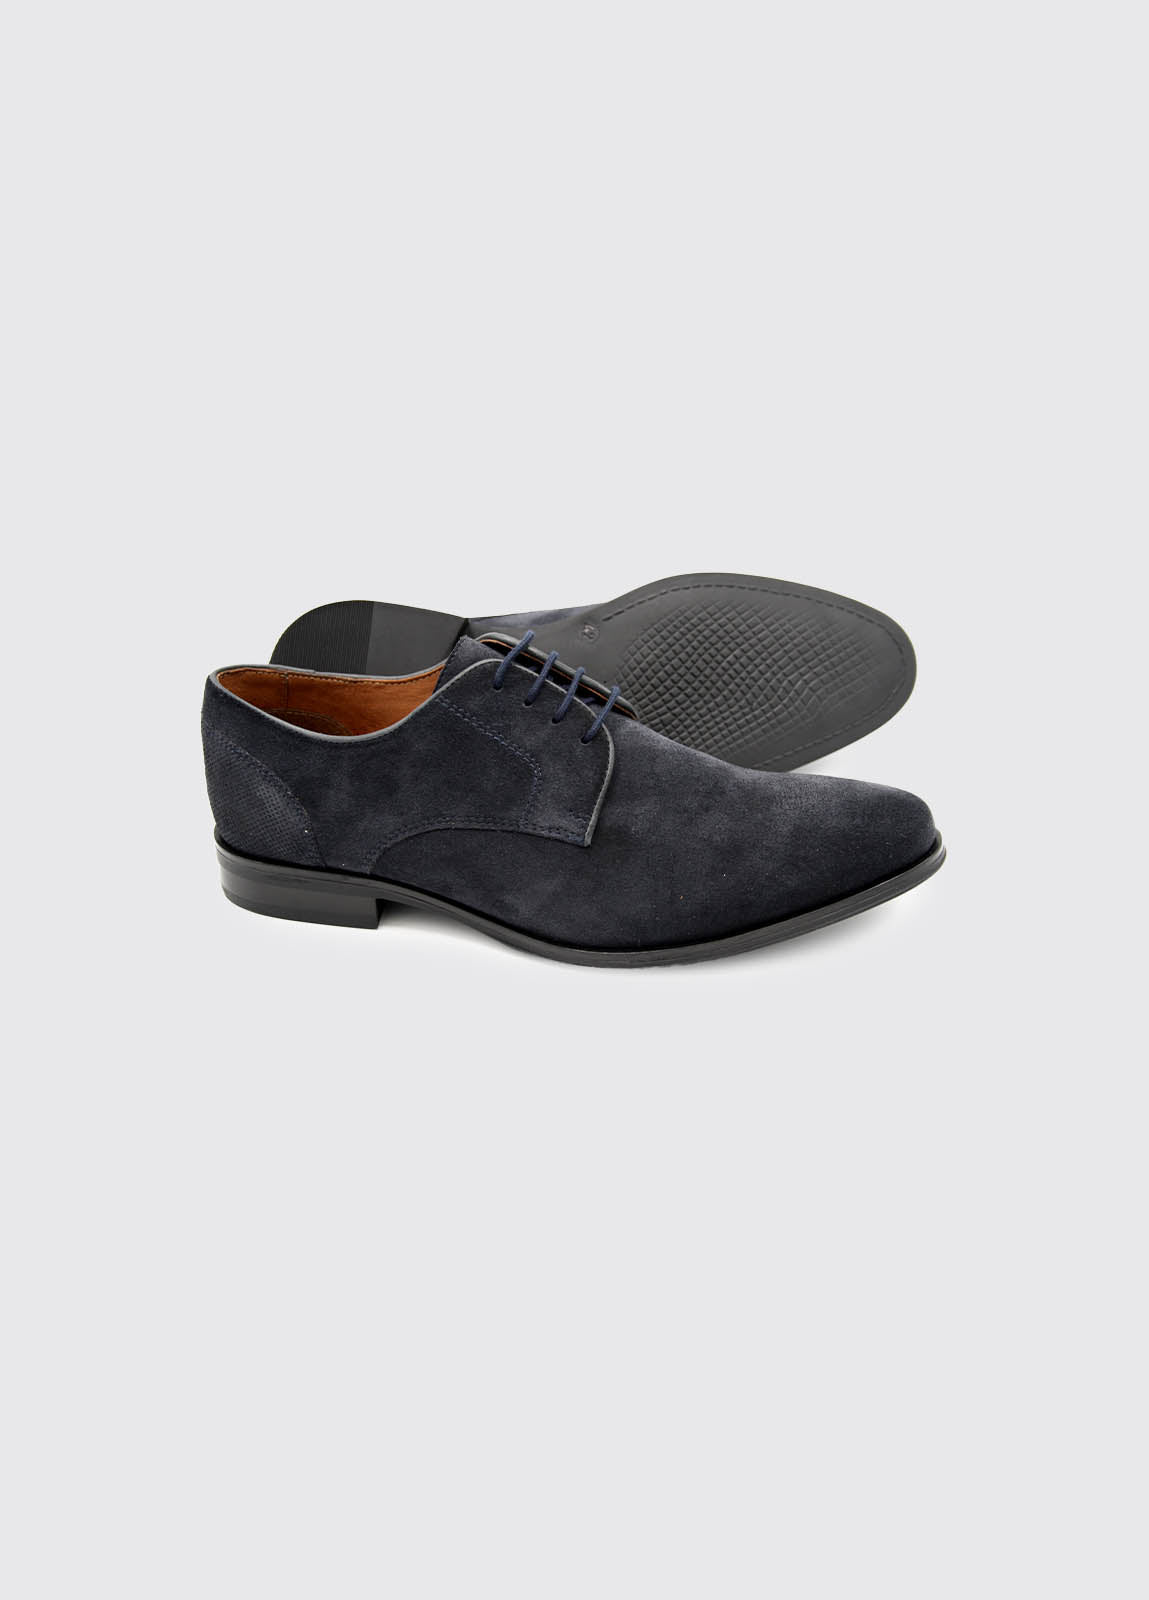 Sarge Navy Suede Shoe-Sole view